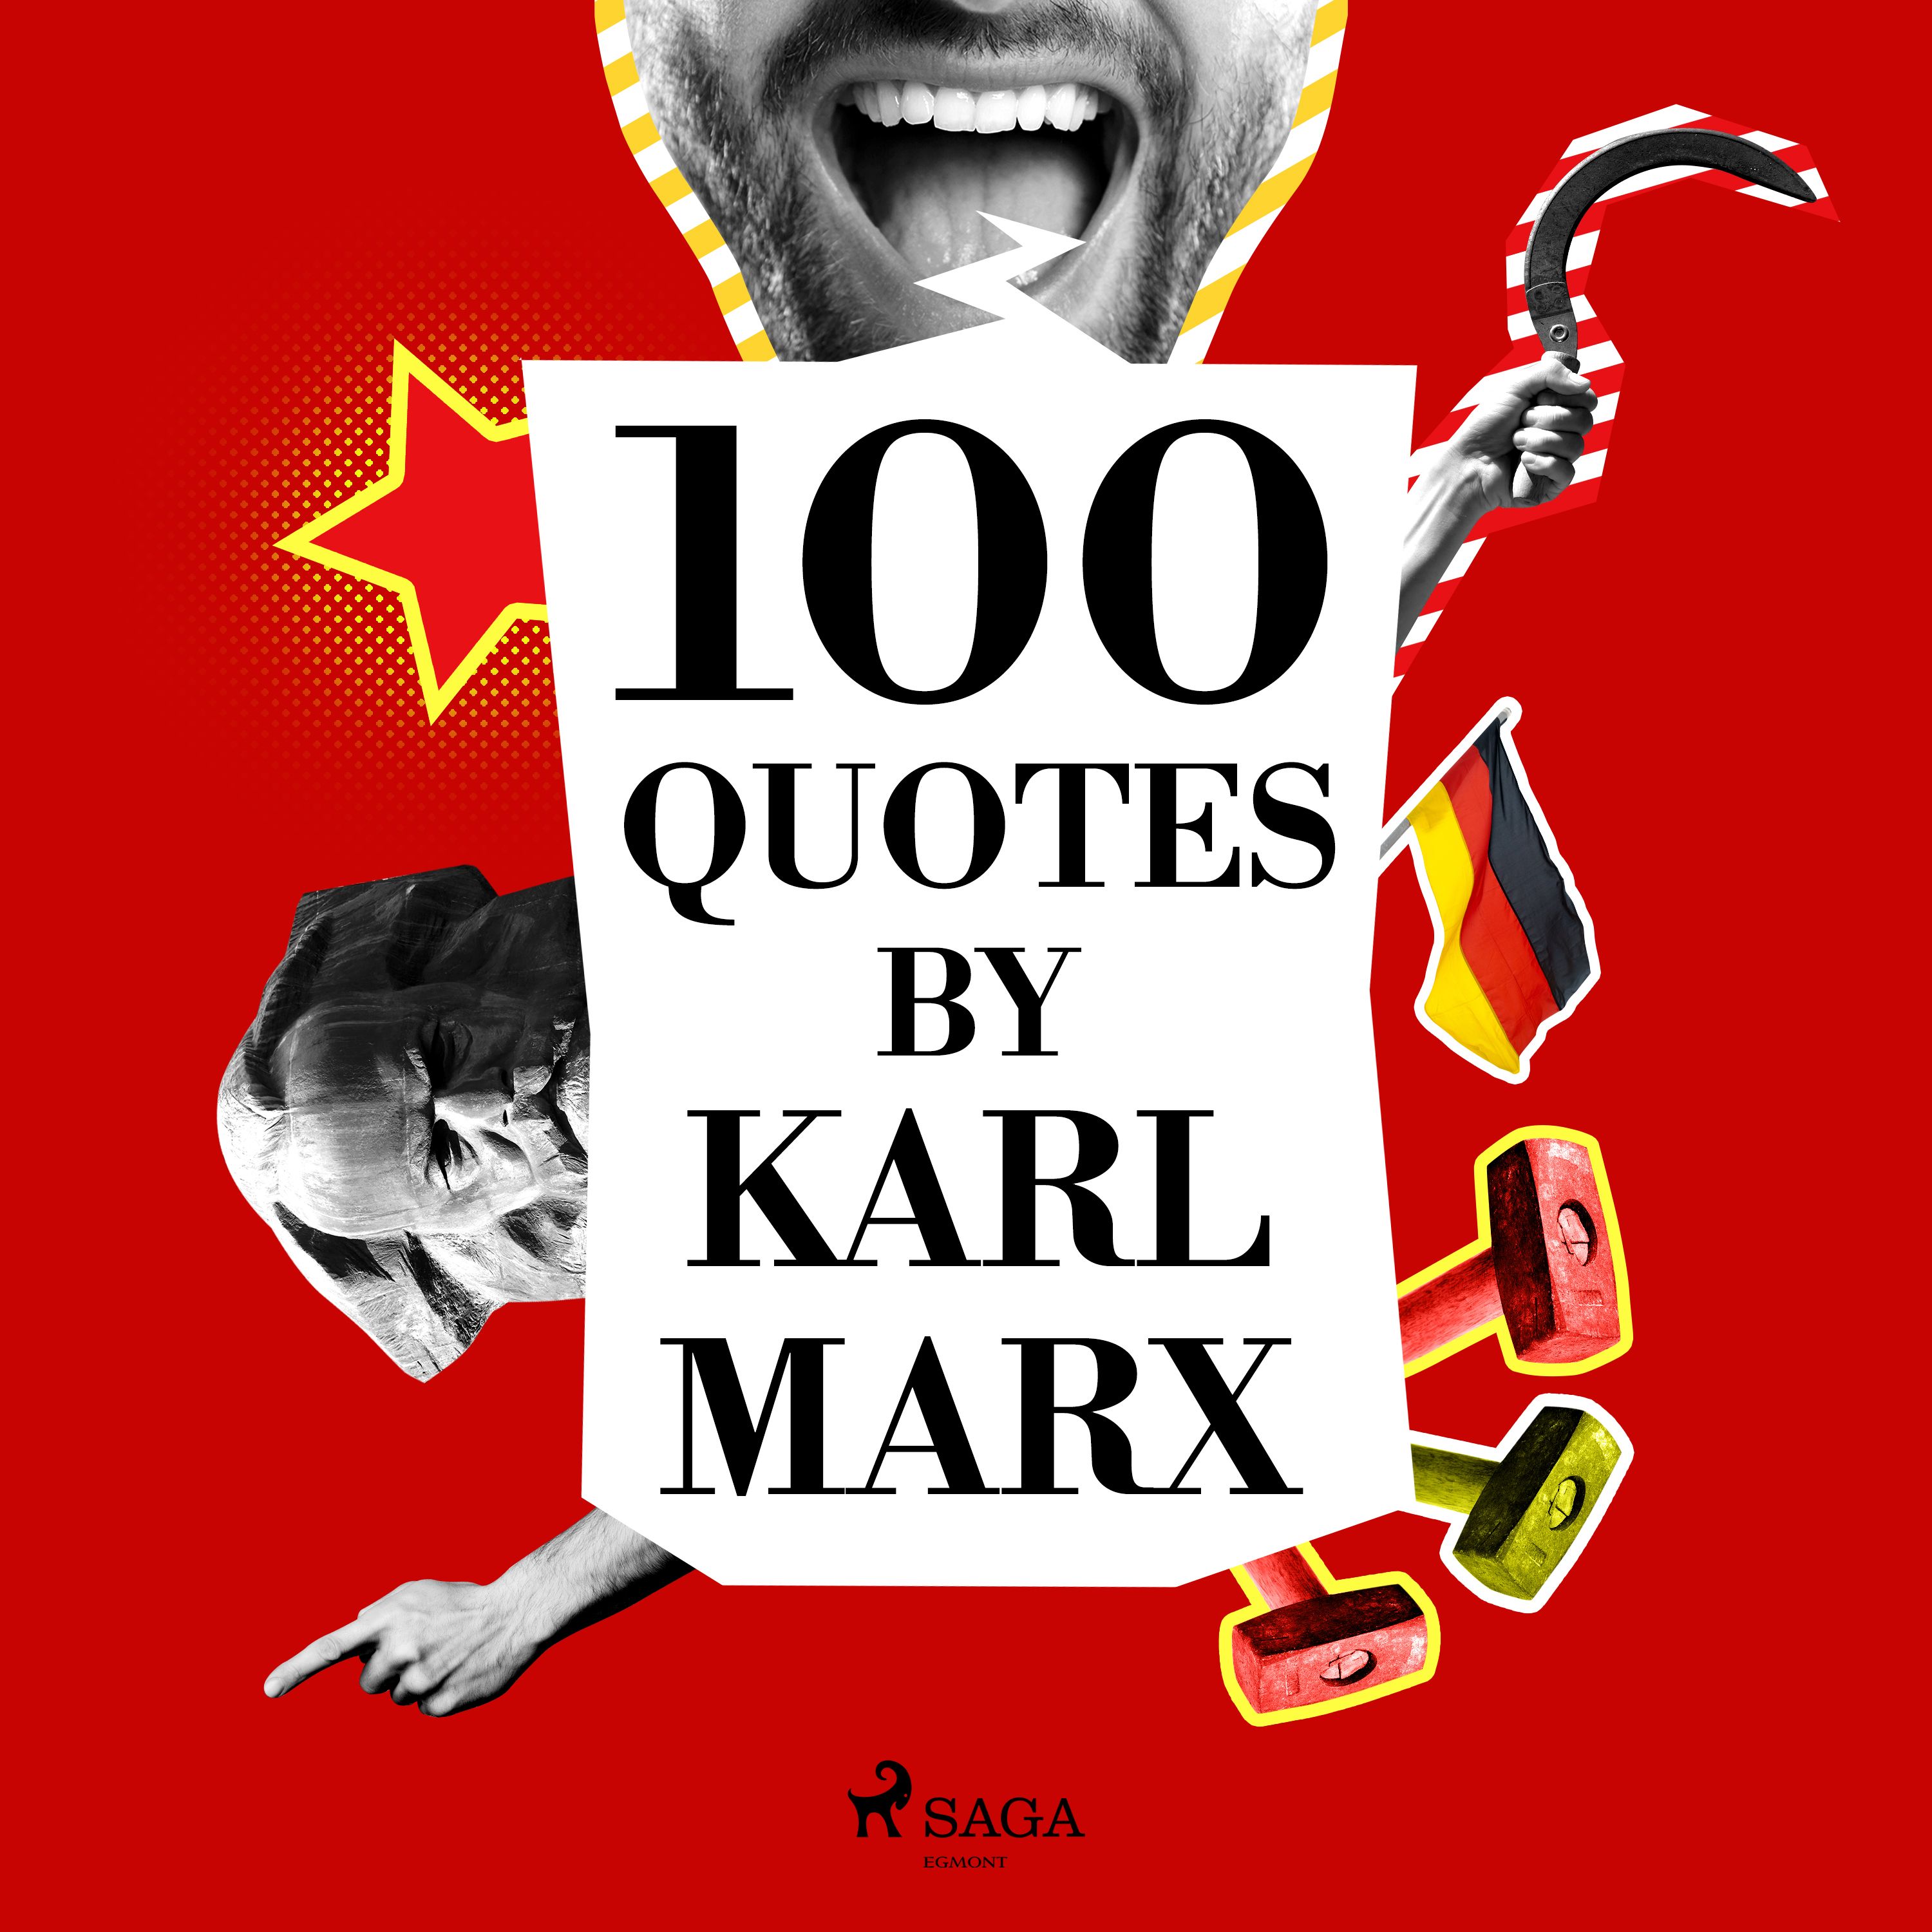 100 Quotes by Karl Marx, audiobook by Karl Marx